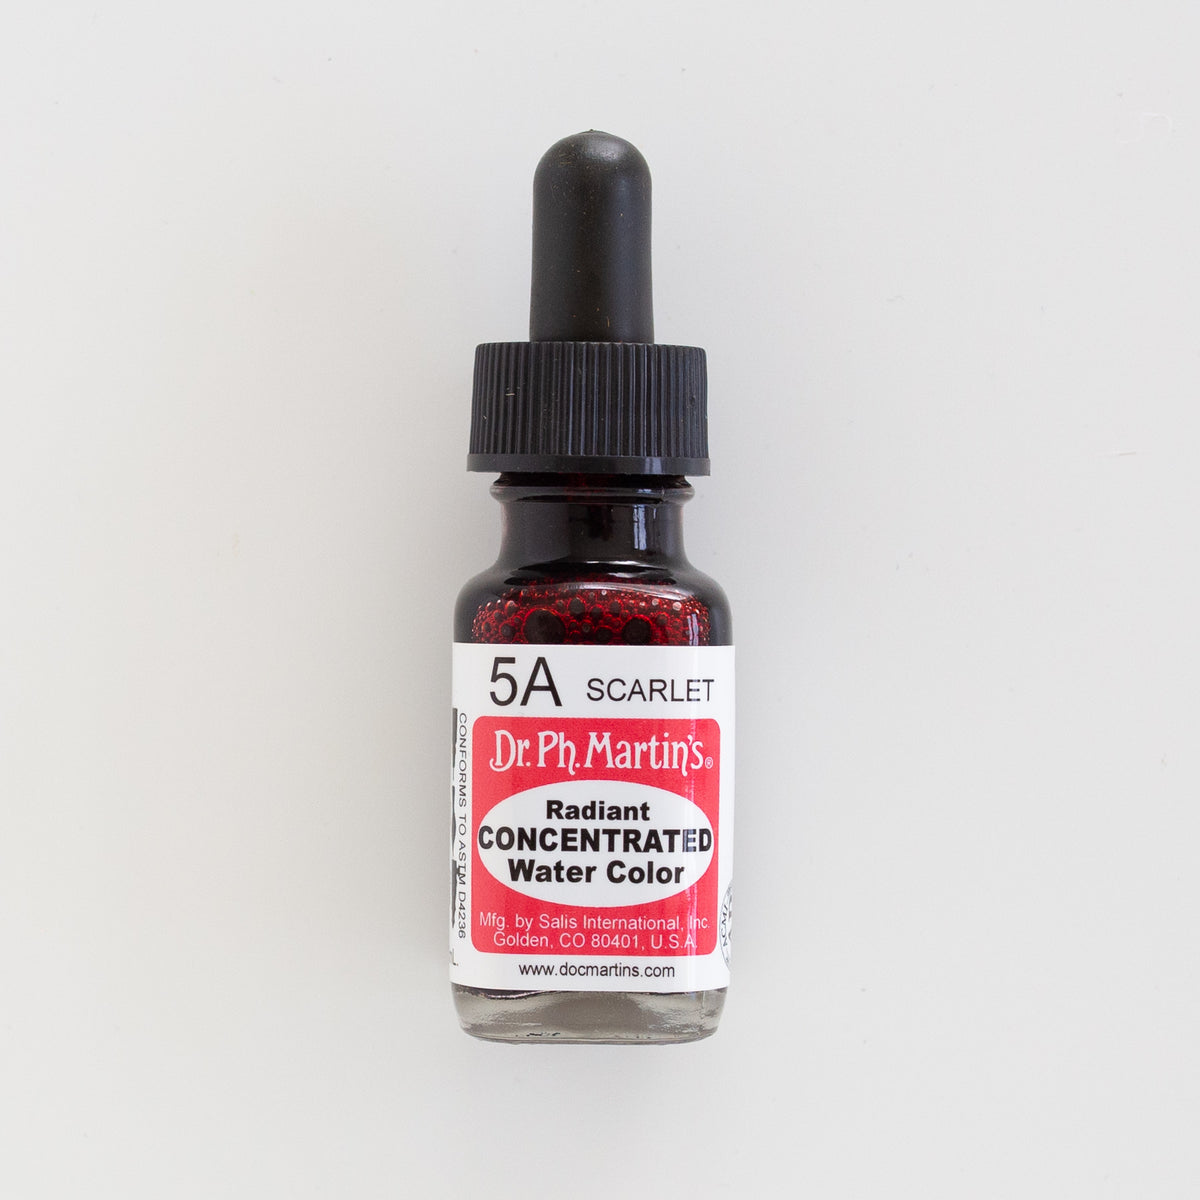 DR. Ph. Martin's Radiant Concentrated 5A Scarlet